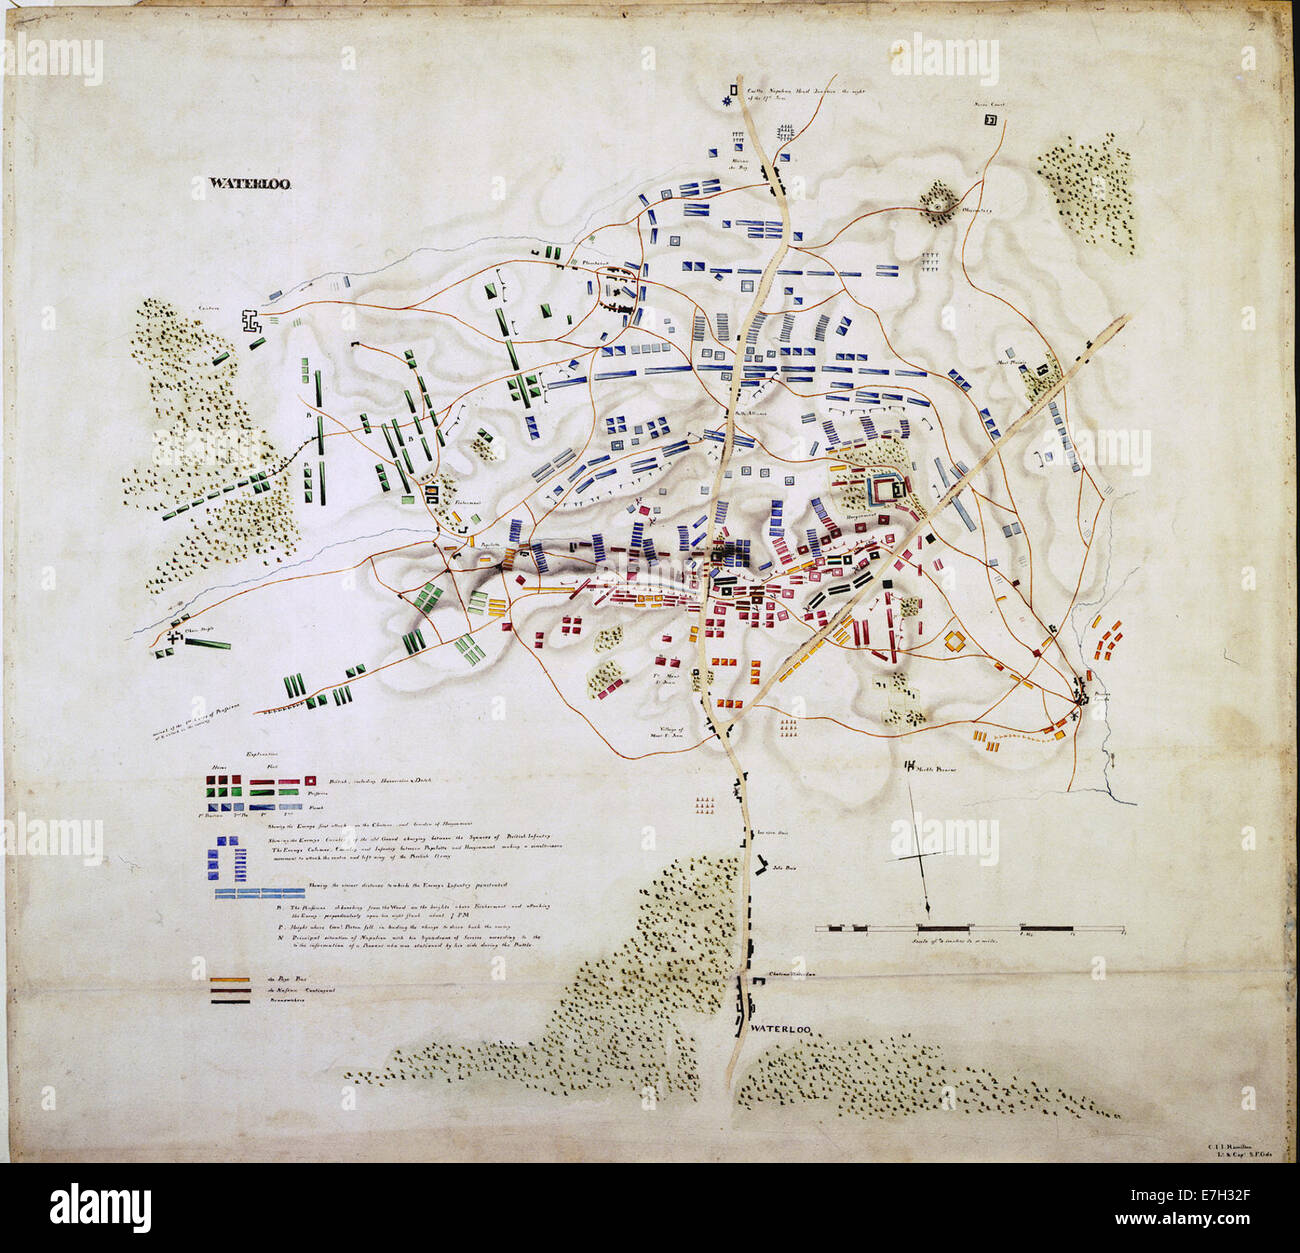 Plan of the Battle of Waterloo - BL Add MS 57653, No. 2 Stock Photo